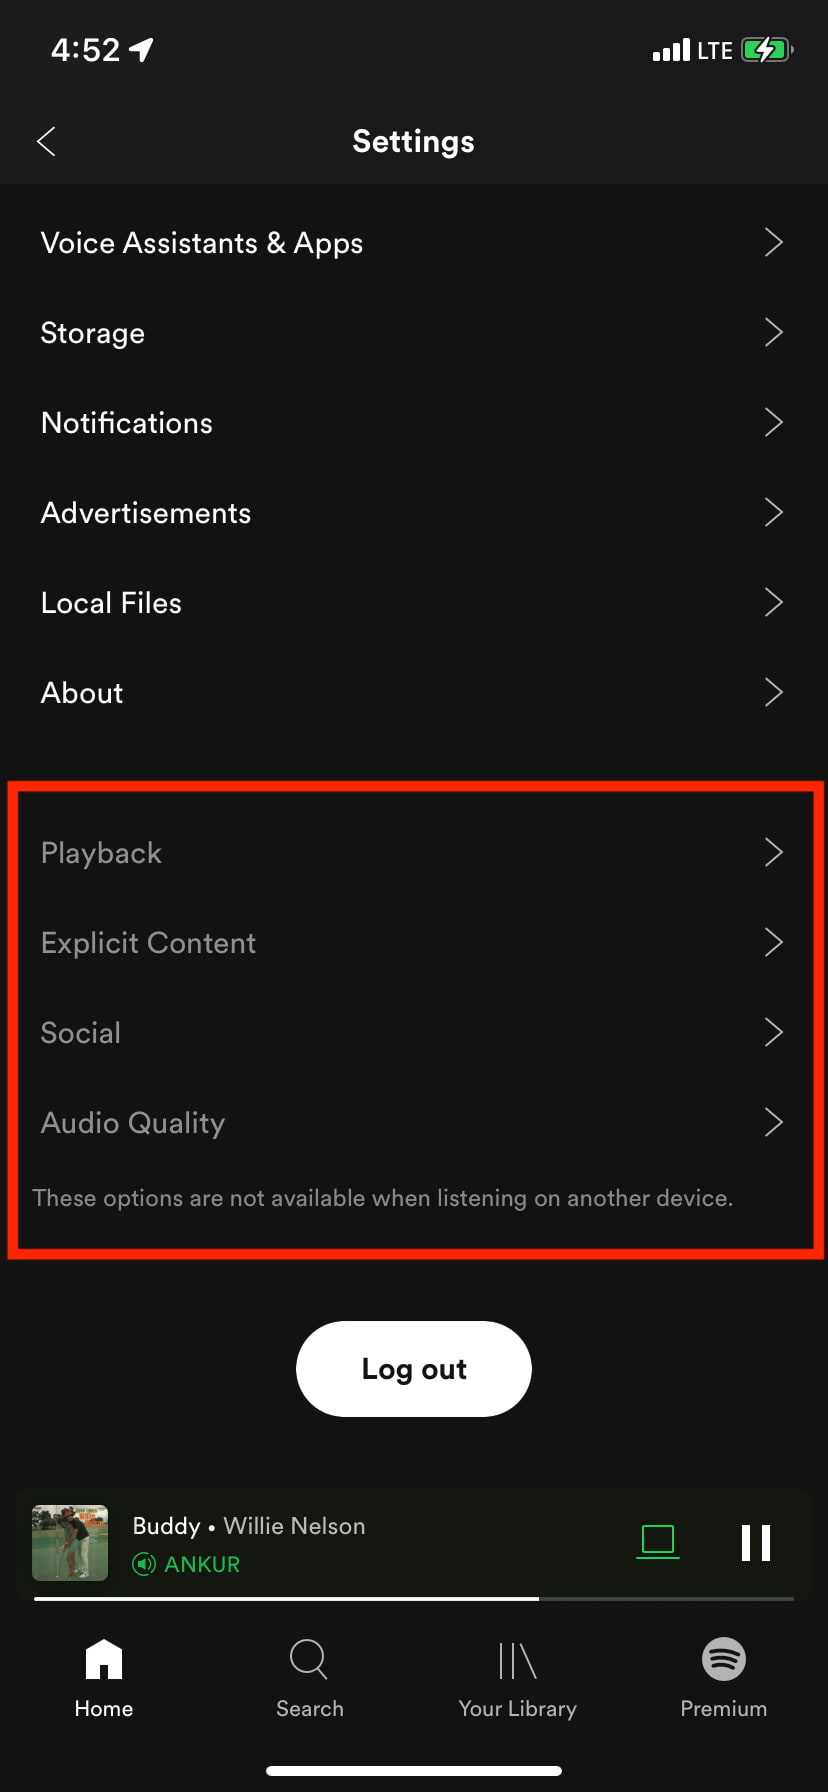 Several Spotify settings disabled in mobile app when listening on desktop